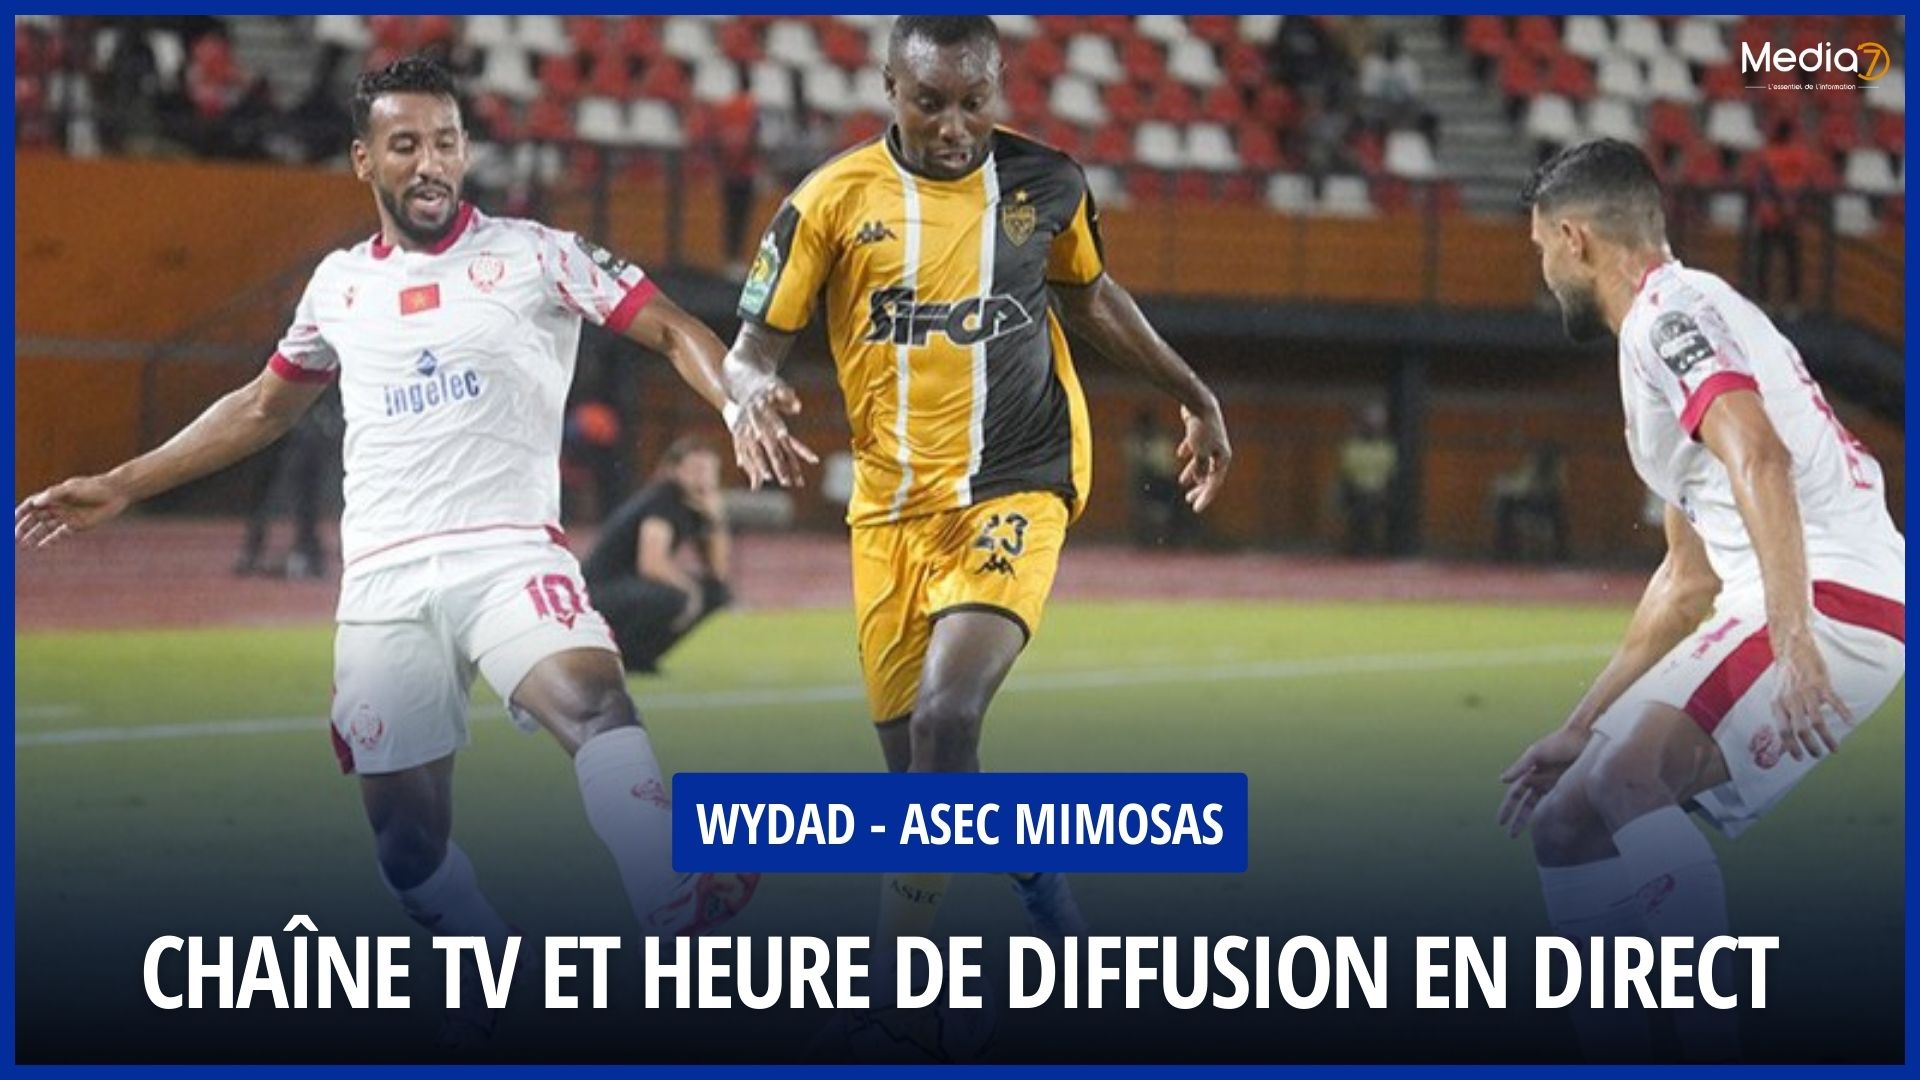 Follow the Wydad - ASEC Mimosas Match Live: Times and Broadcast Channels - Media7